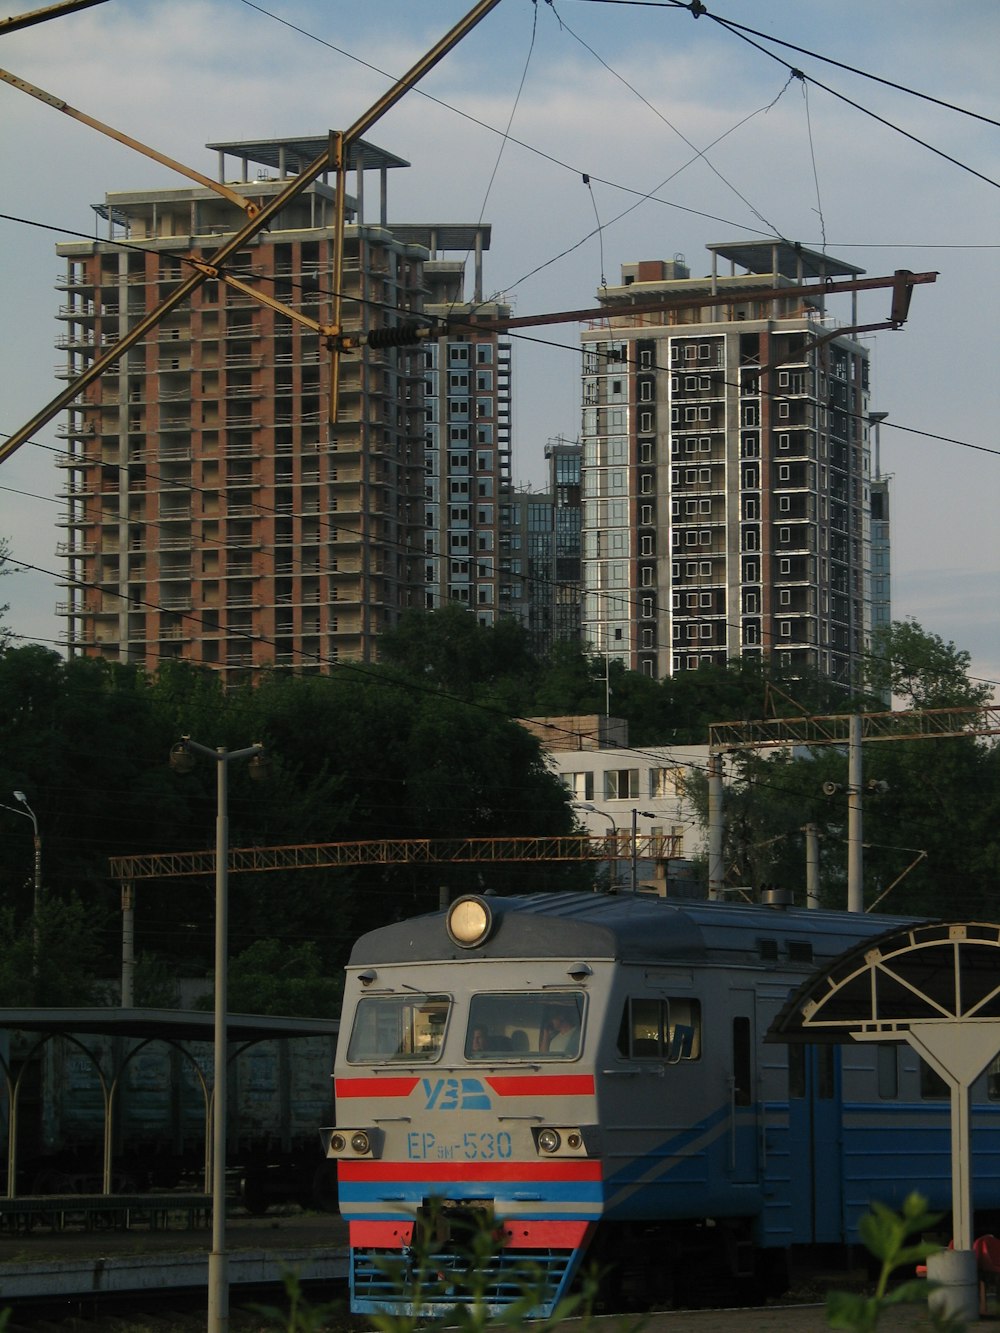 white and red train on rail near high rise building during daytime